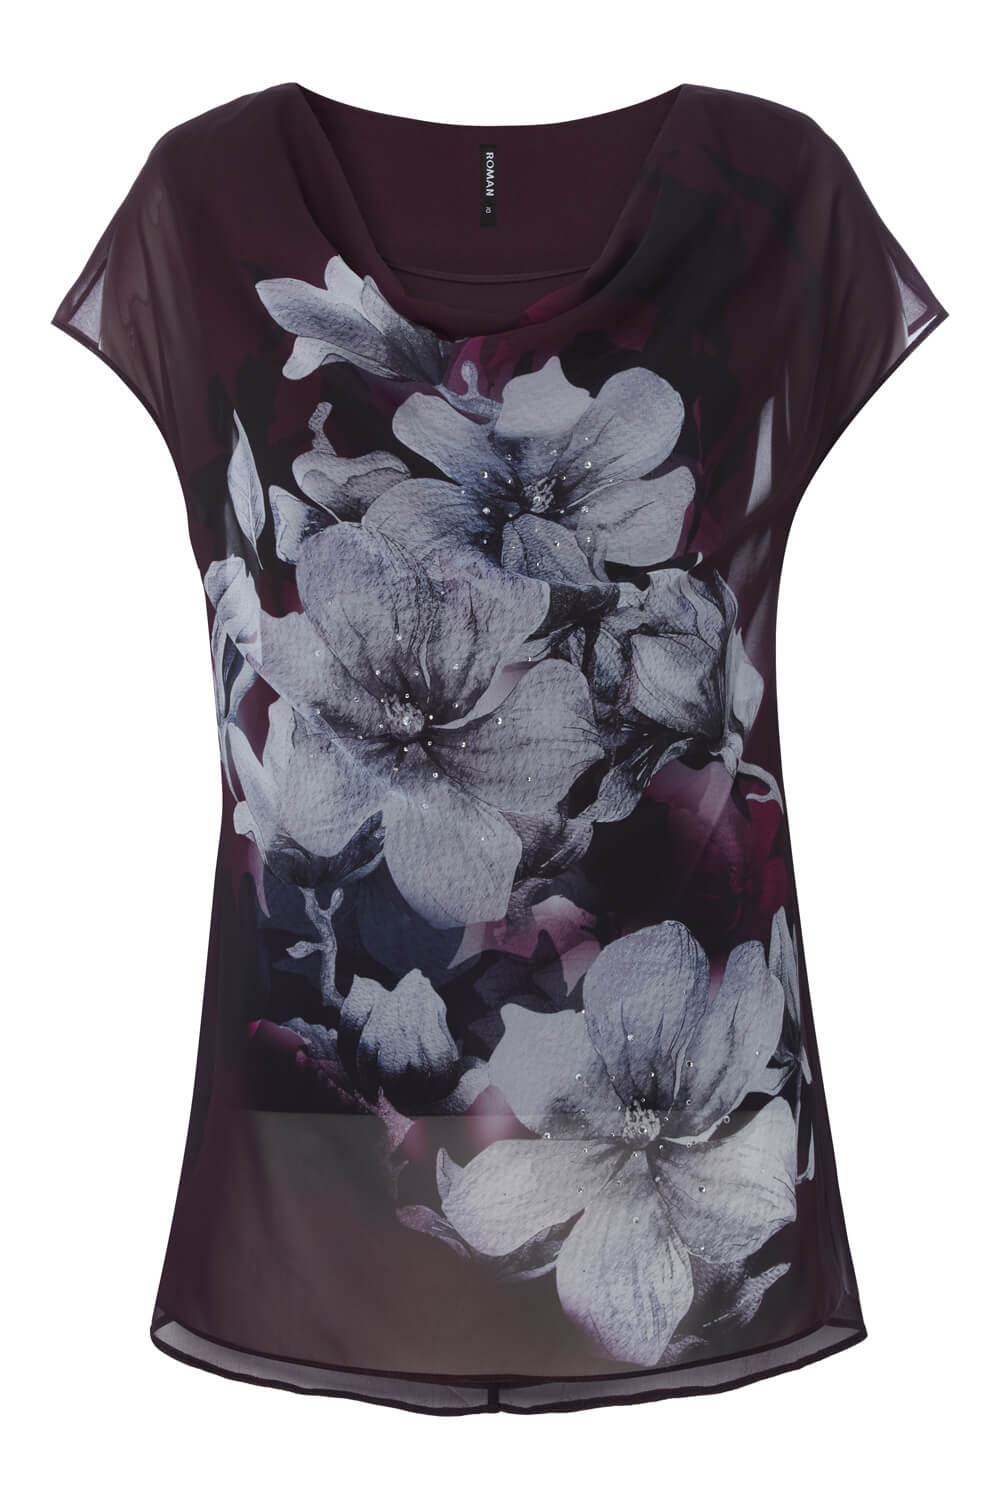 Purple Cowl Chiffon Floral Top, Image 2 of 4